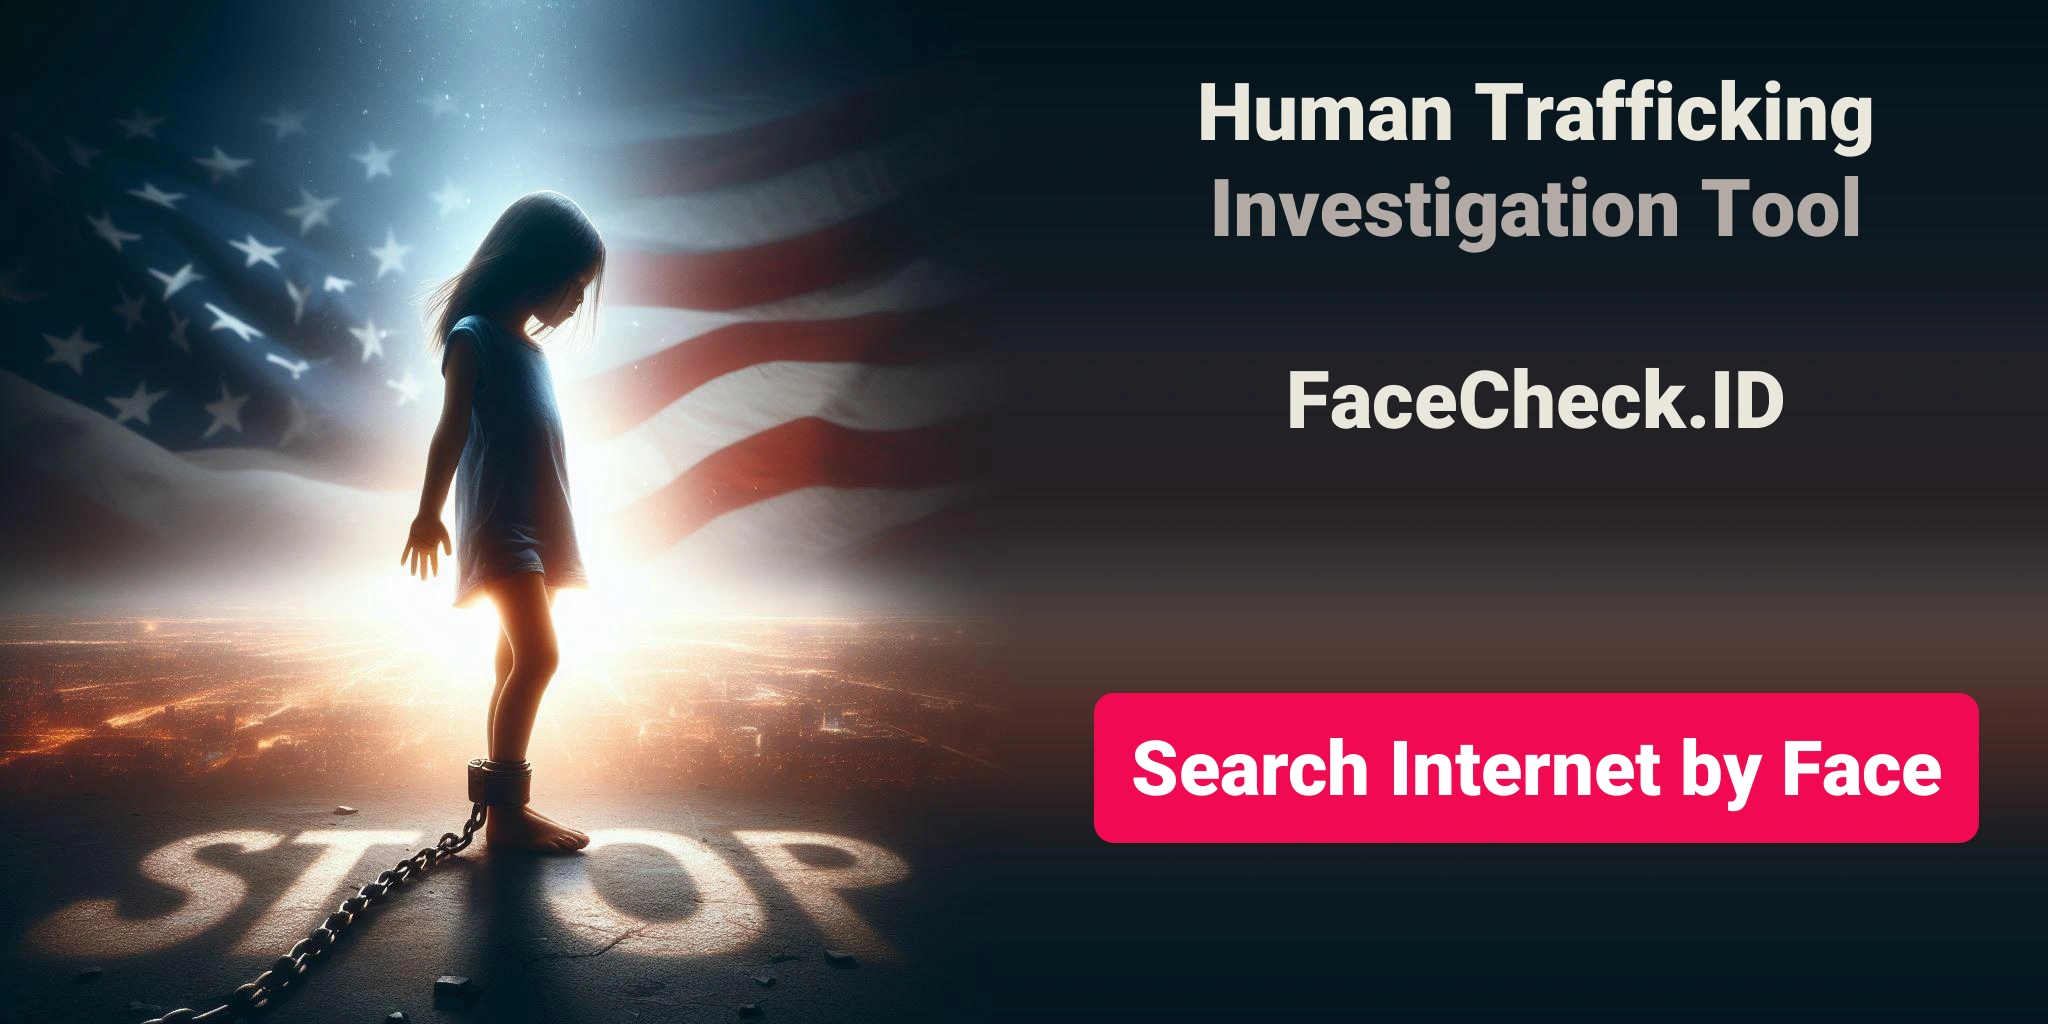 Human Trafficking Investigation ToolFaceCheck.ID Search Internet by Face